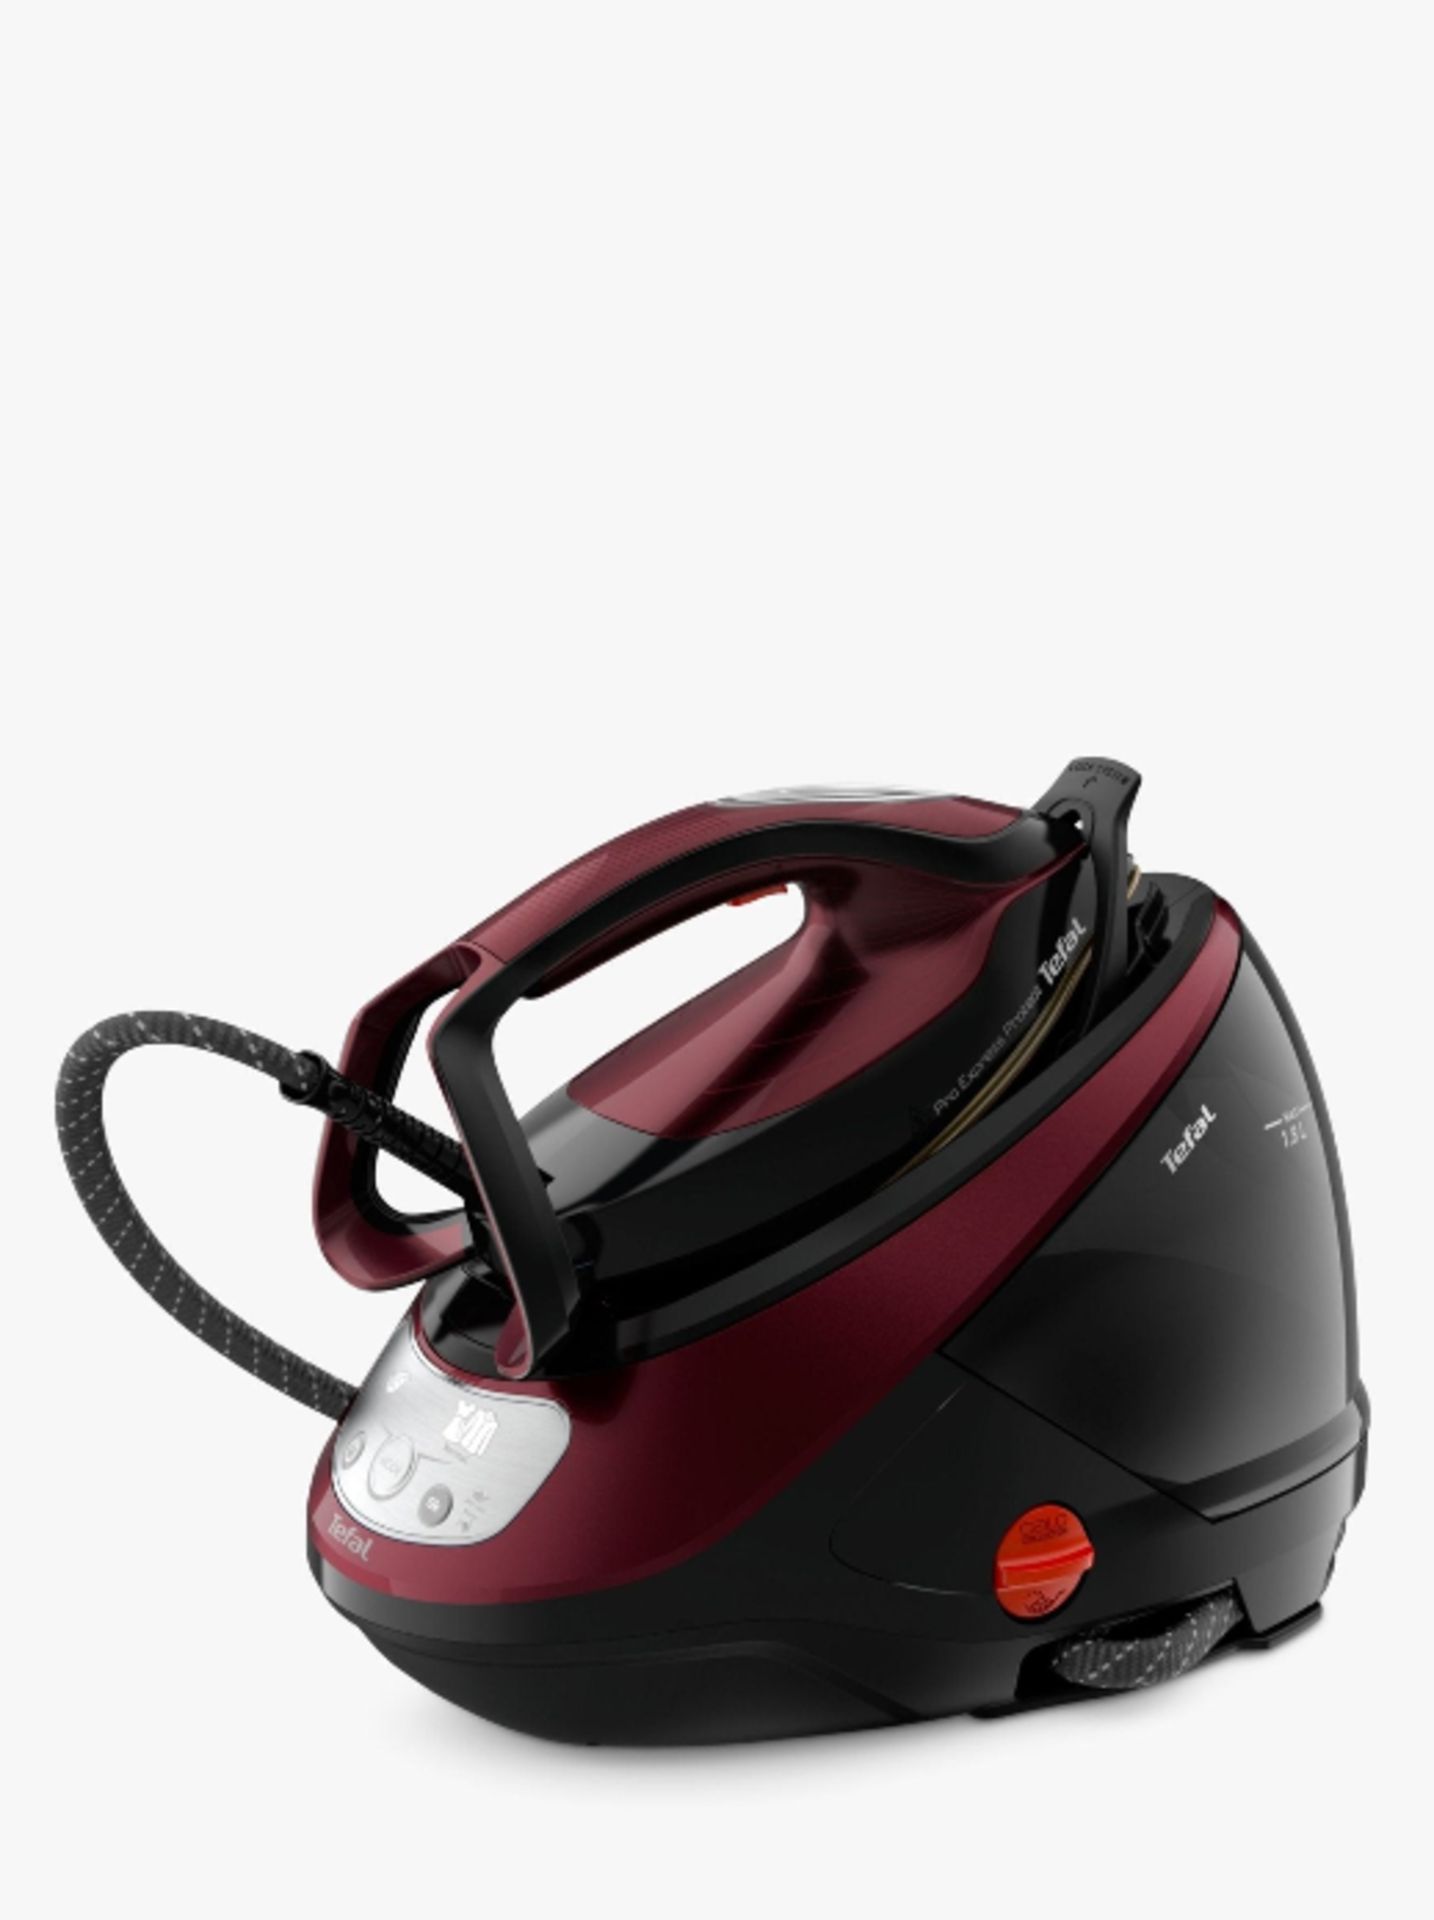 Tefal Pro Express GV9230G0 Protect Steam Generator Iron RRP £239.99